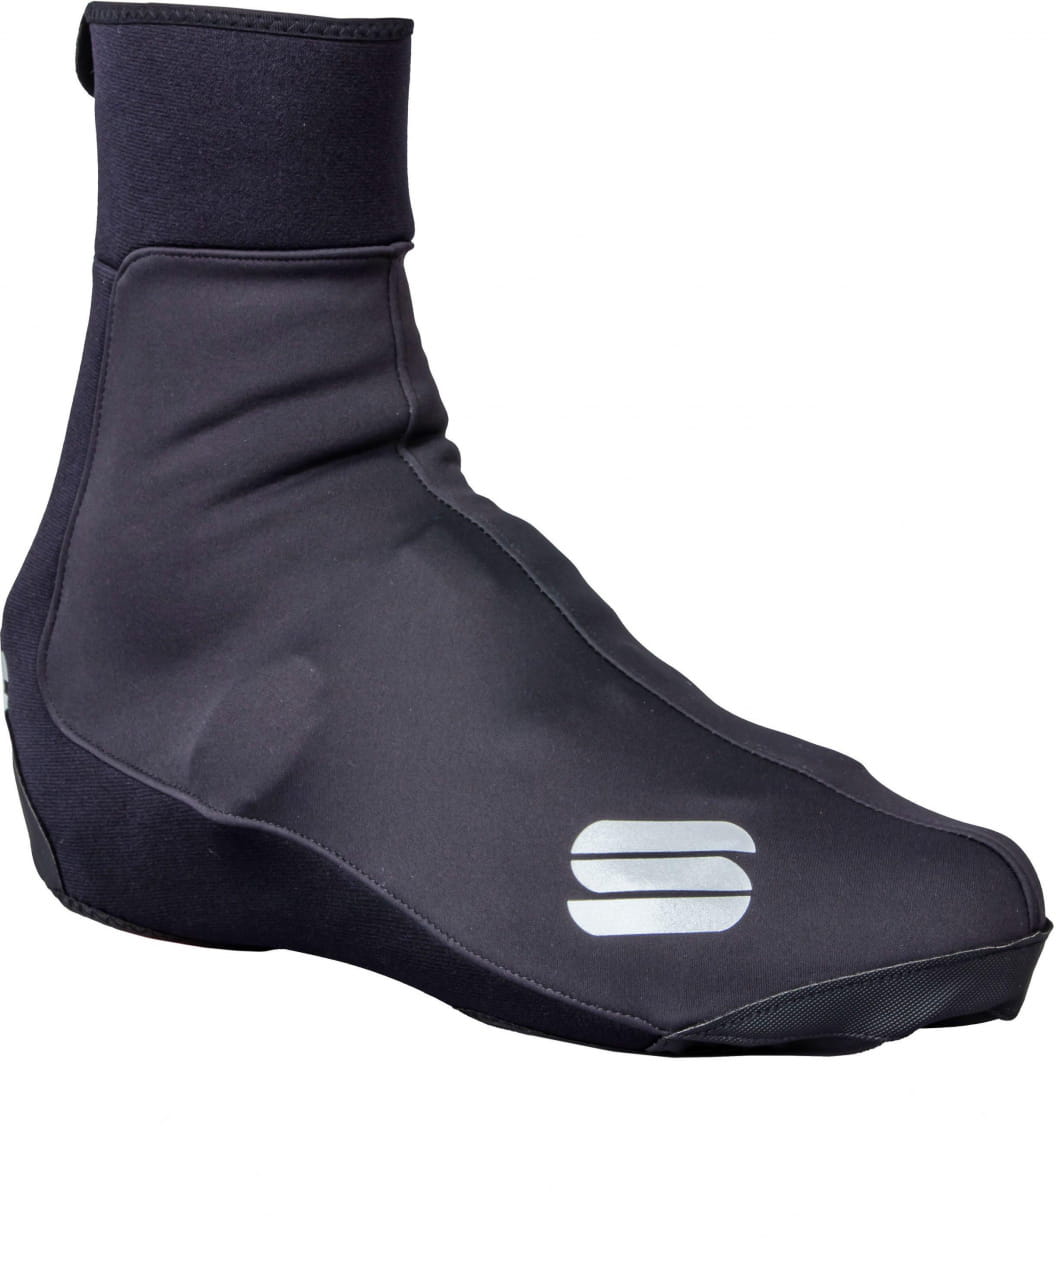 Couvre-chaussures unisexe Sportful Roubaix Thermal Bootie